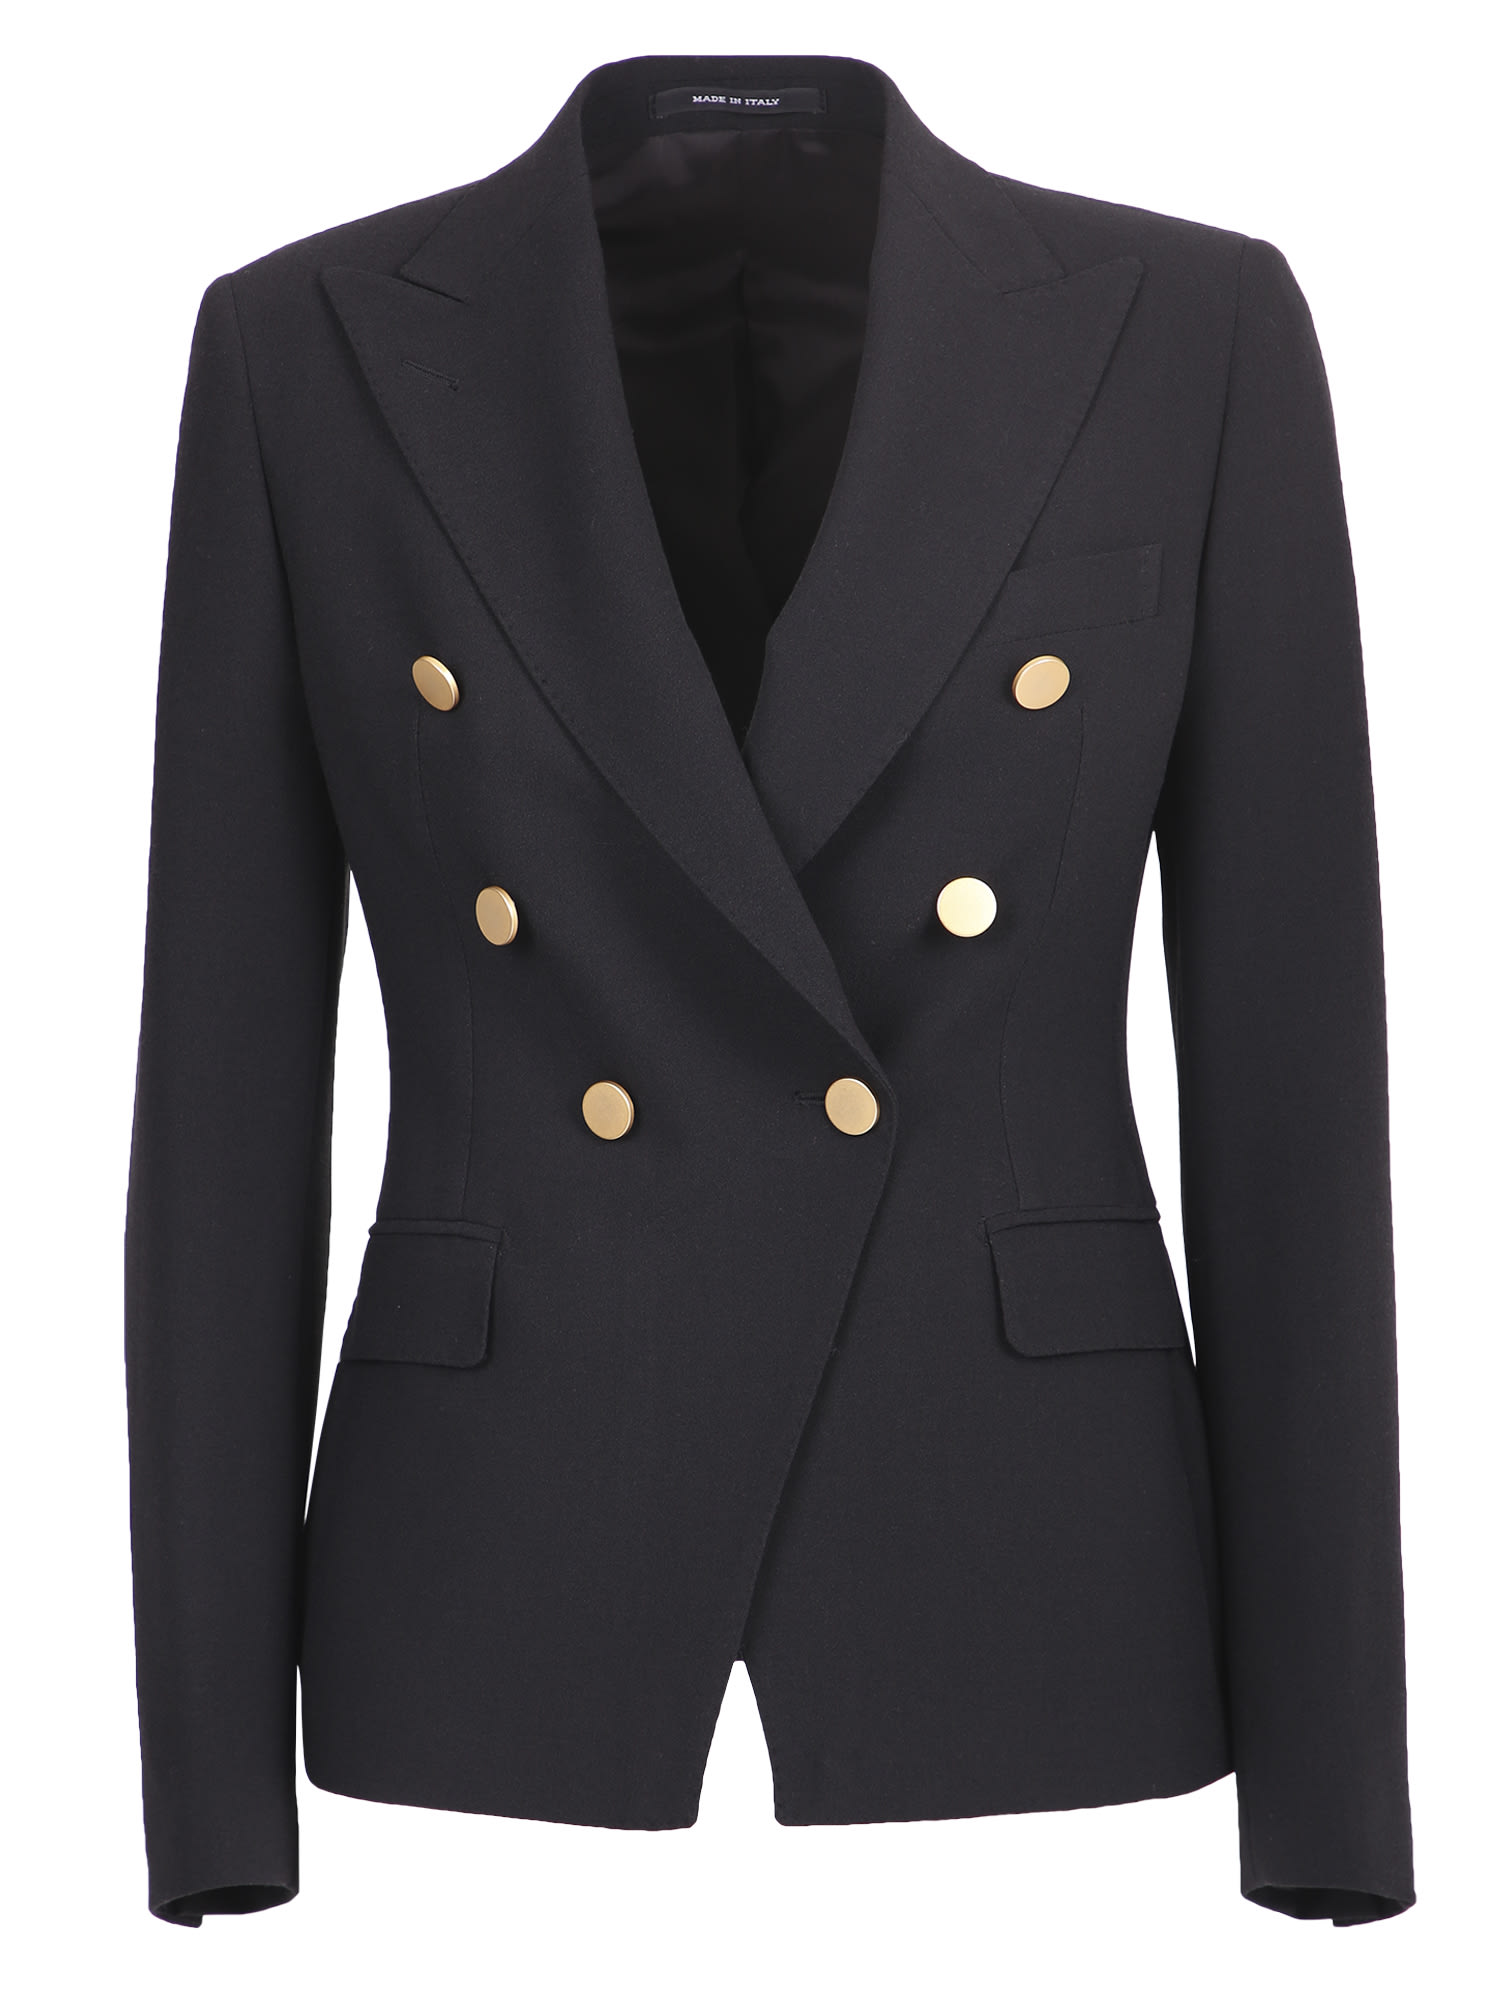 Tagliatore Double-breasted Jacket